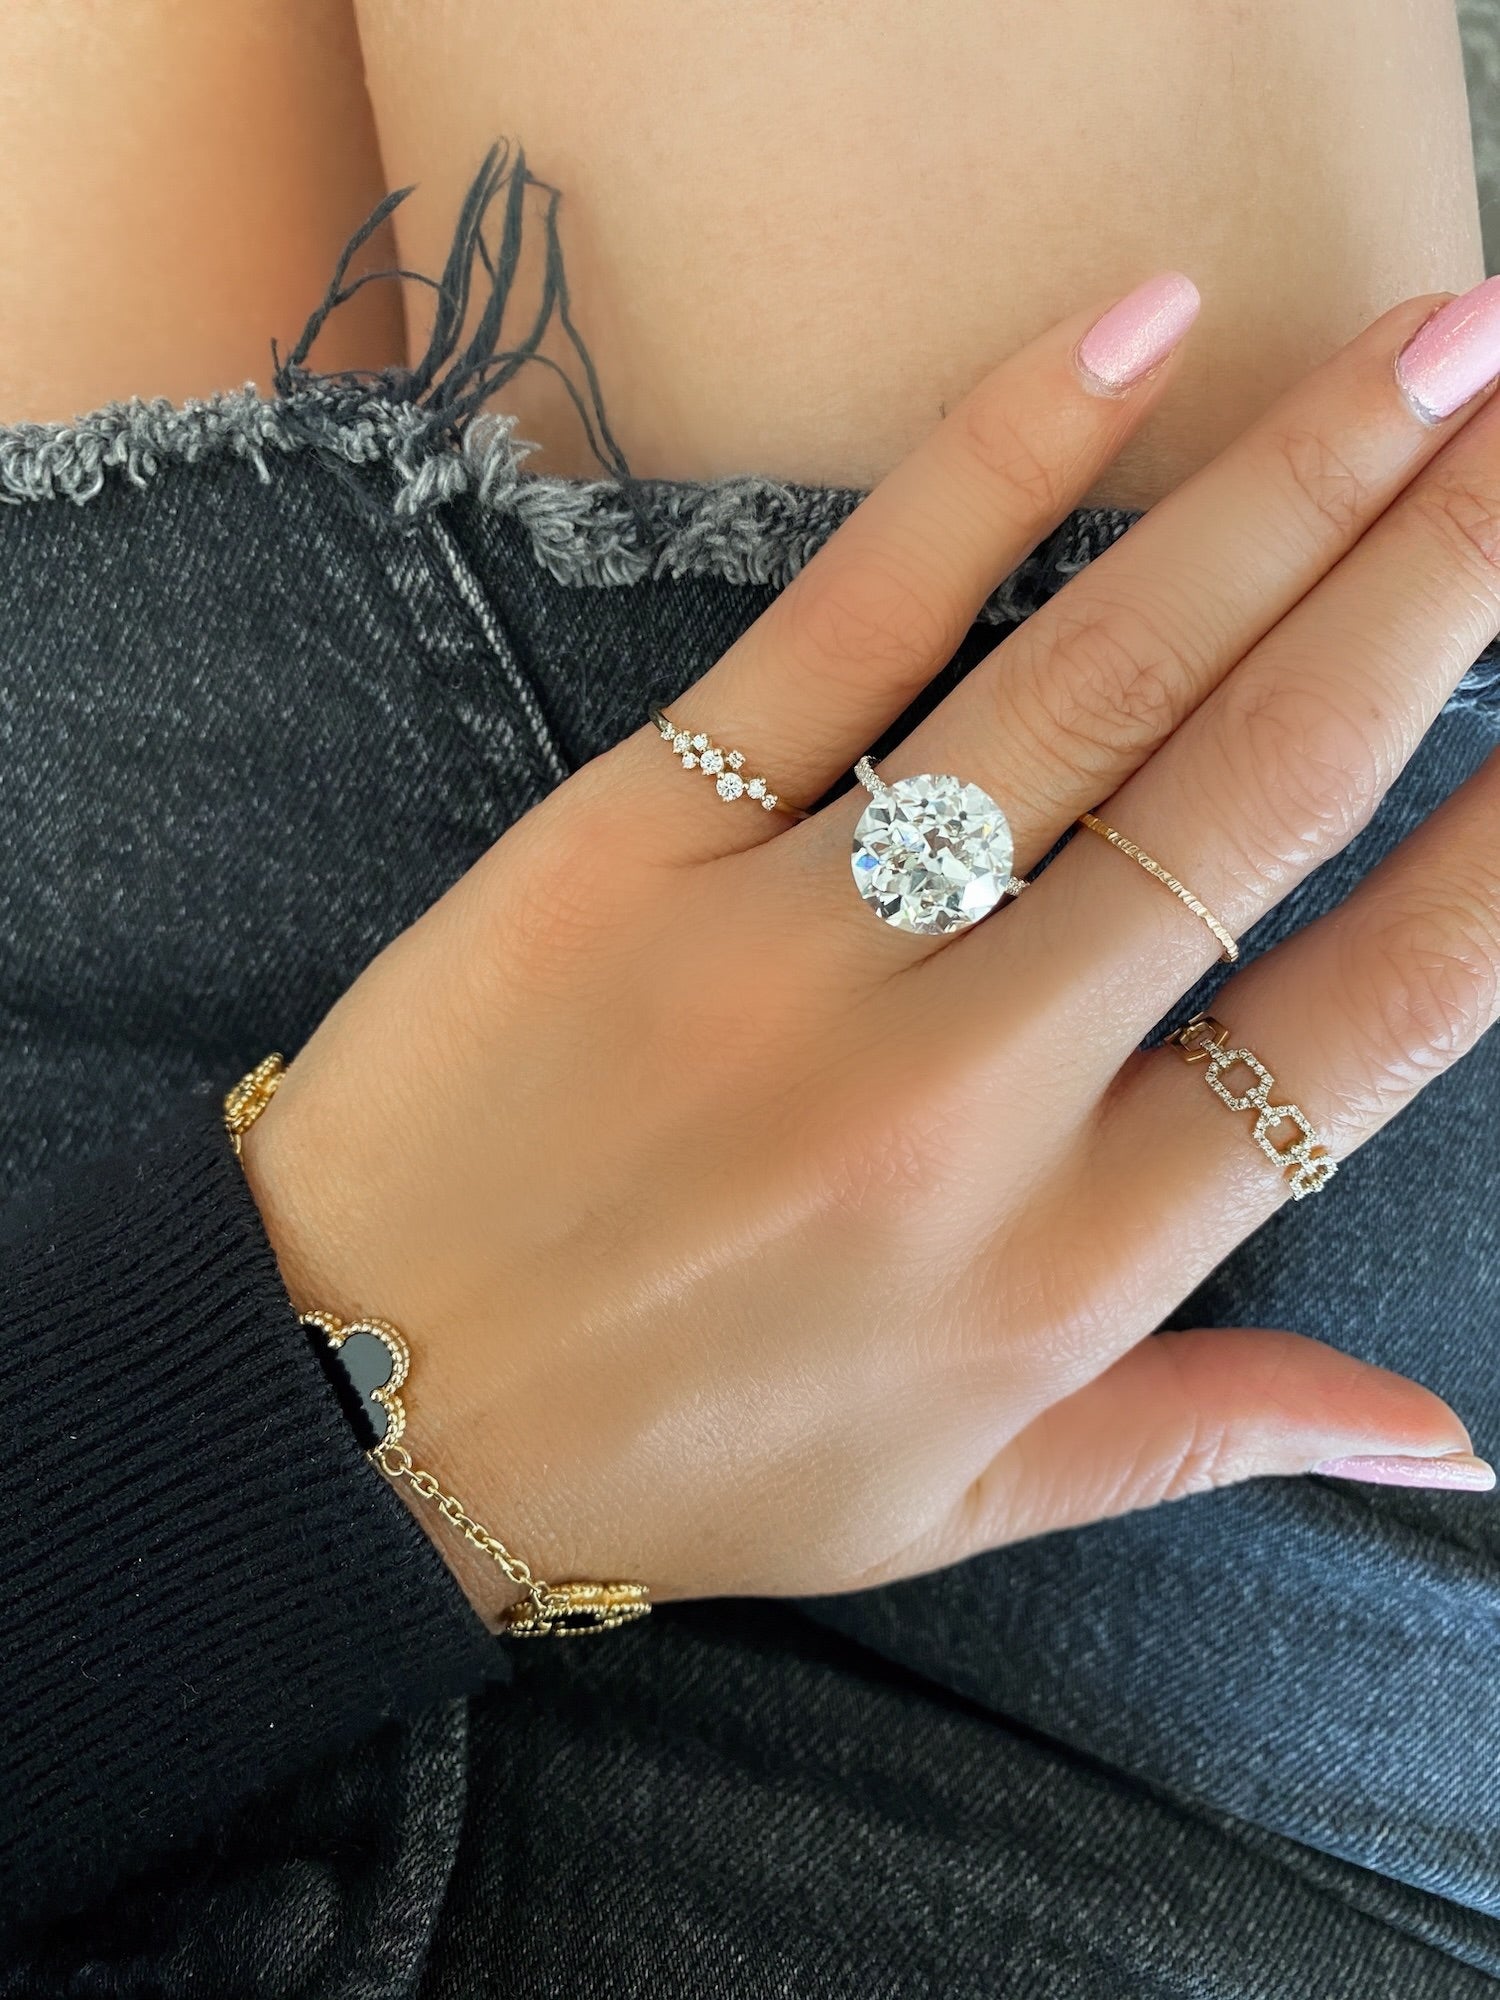 31 Stunning Oval Engagement Rings Perfect for Your Finger